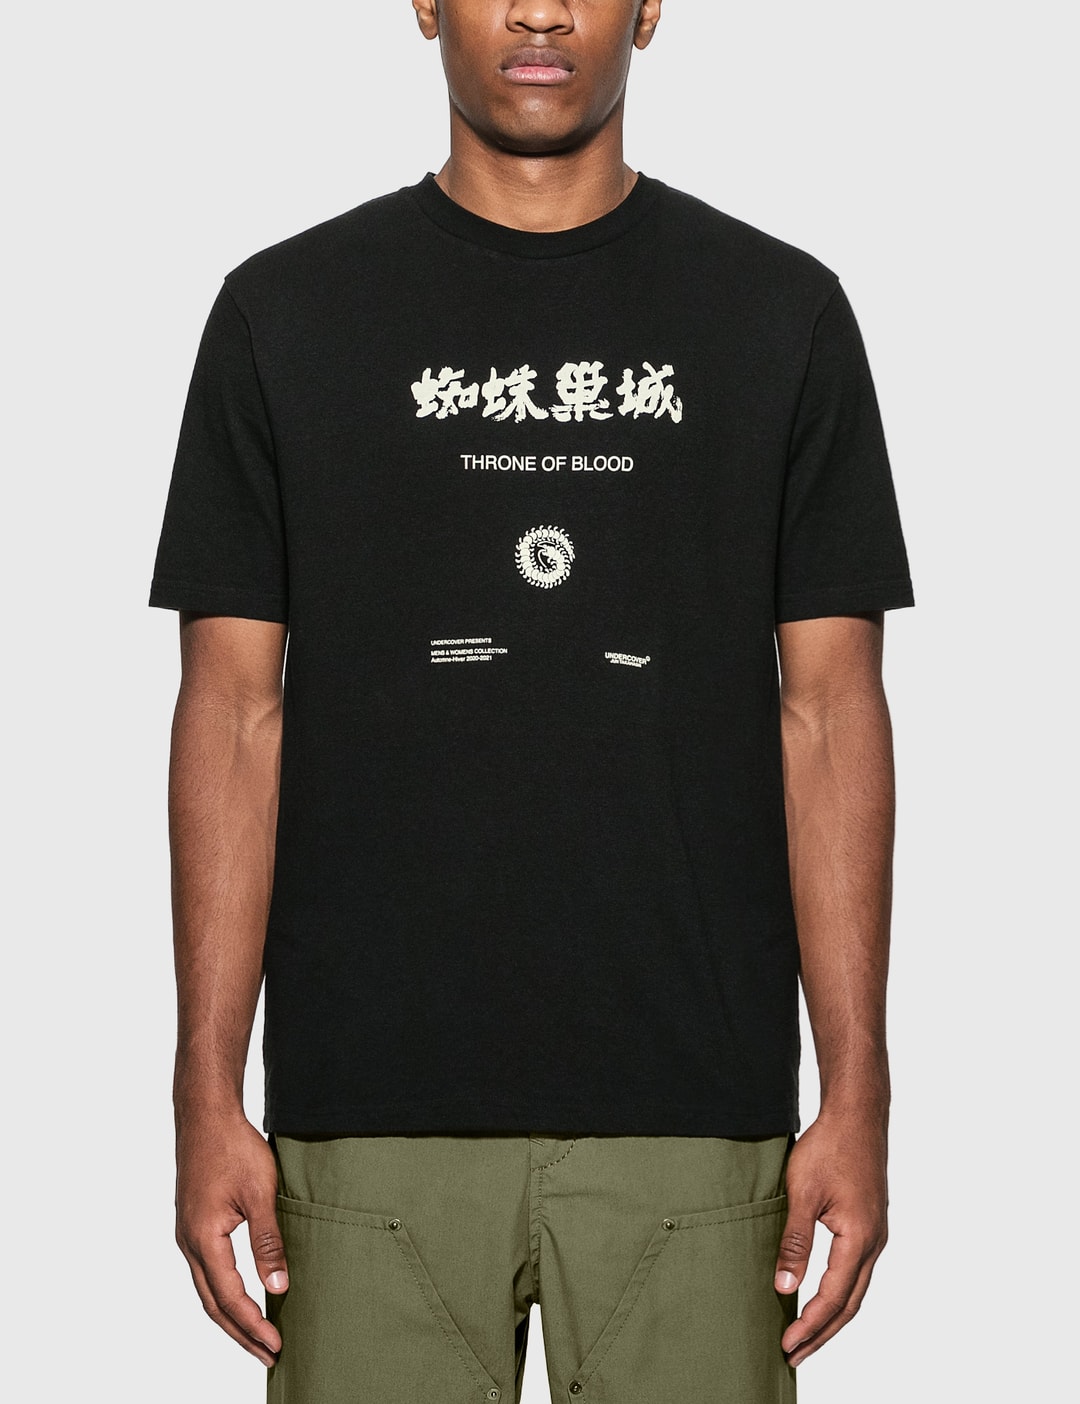 Undercover - Throne of Blood Oversized T-Shirt | HBX - Globally Curated ...